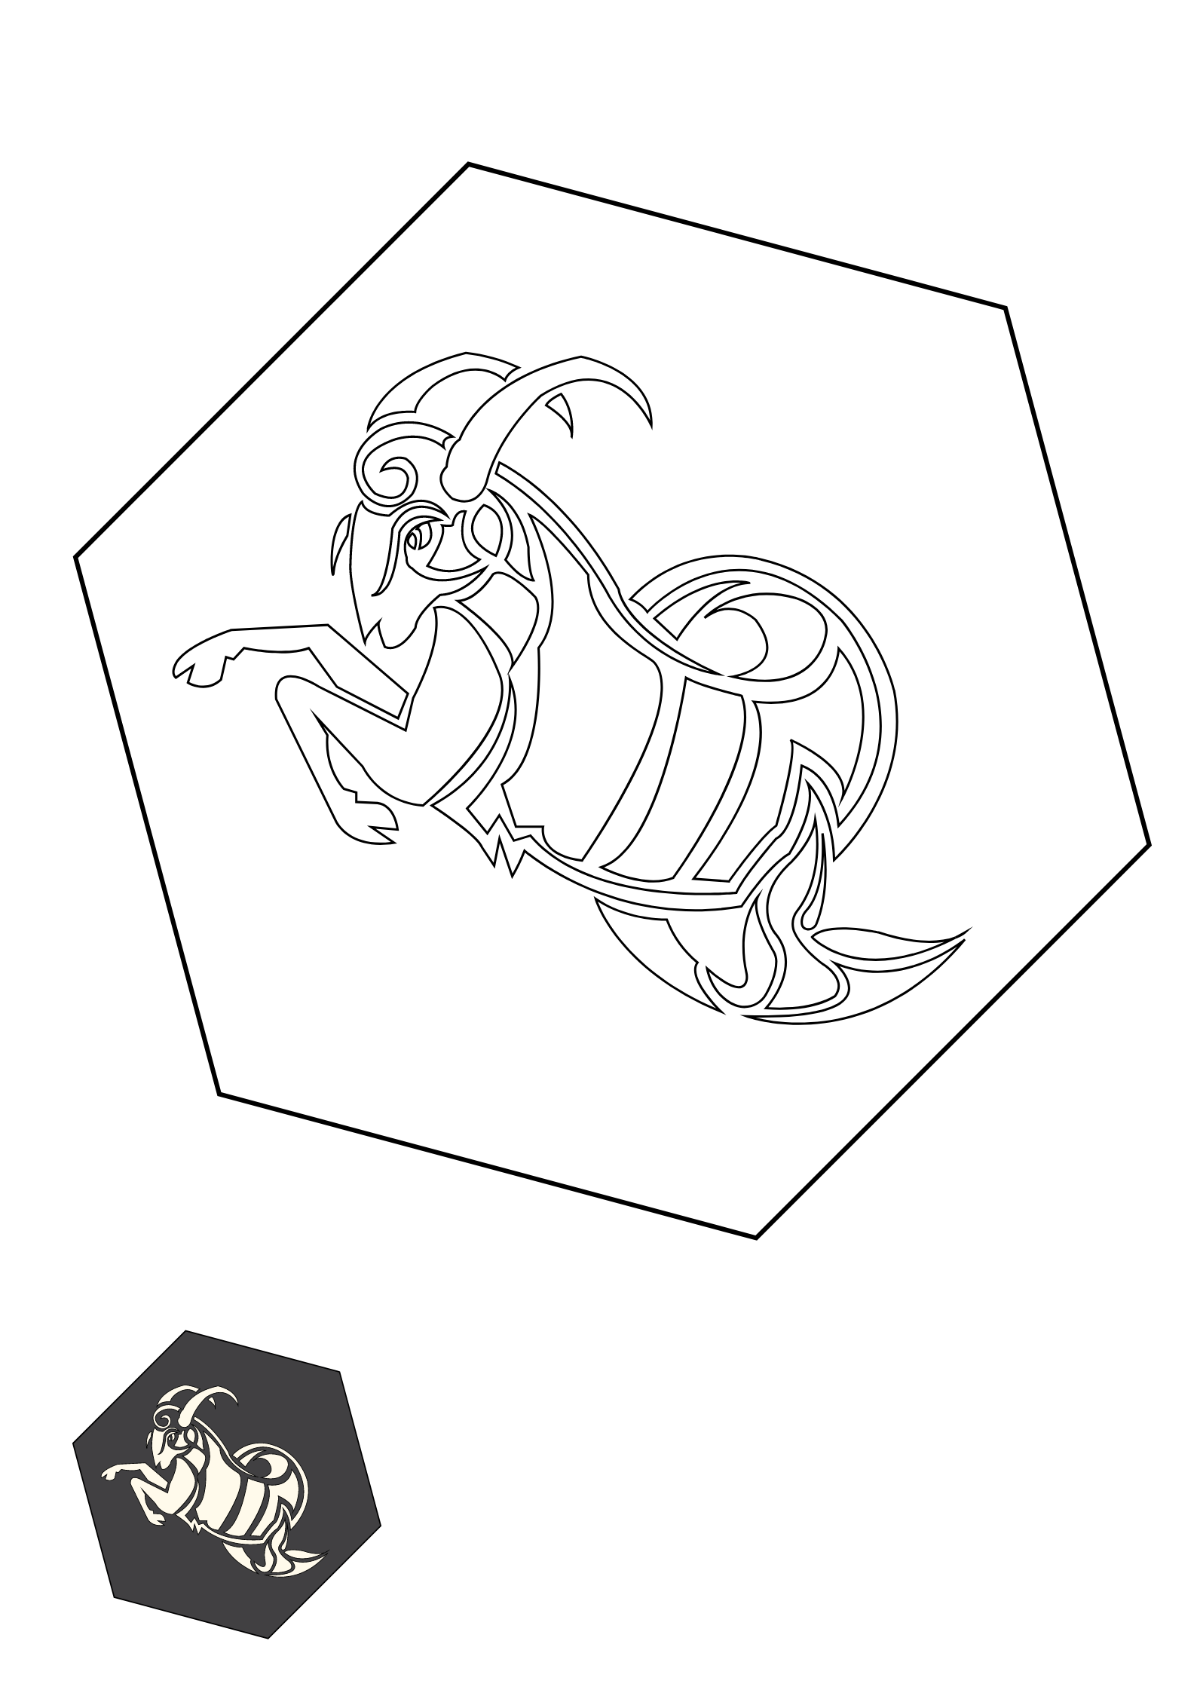 Tribal Capricorn coloring page Template